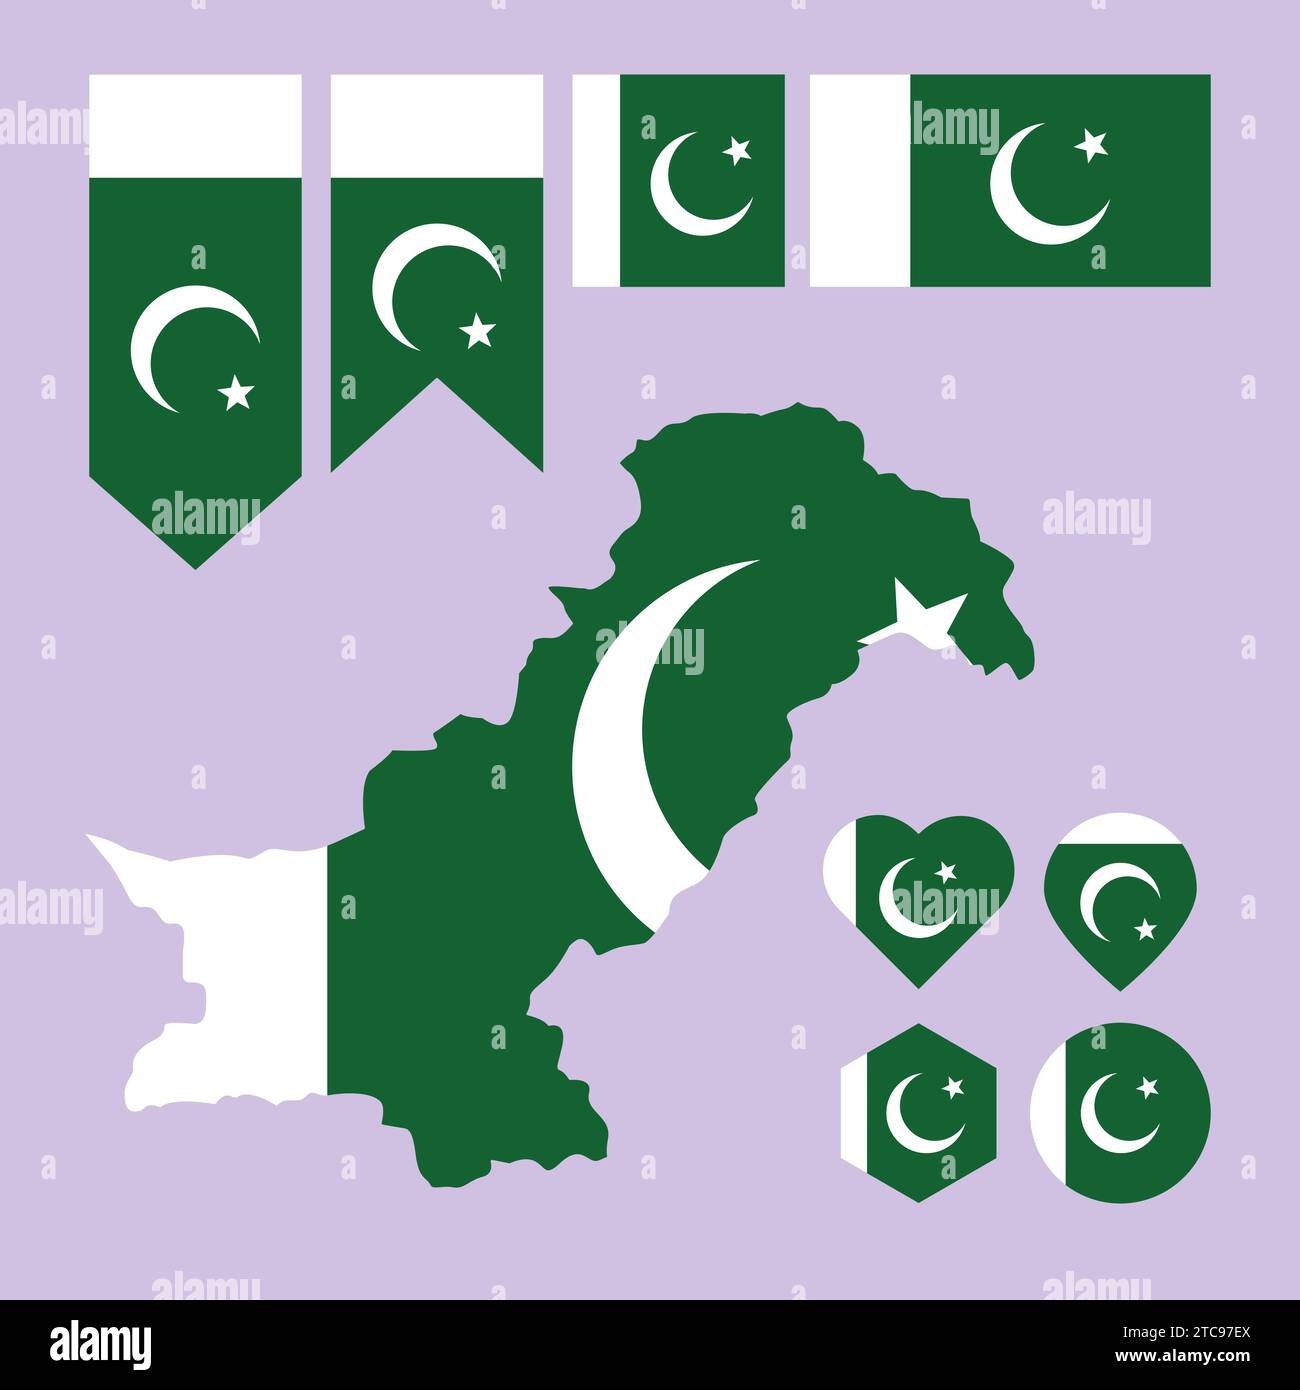 Set of Pakistani Flag Map illustration Vector Icon Map of Pakistan Green Flag Asian country Stock Vector